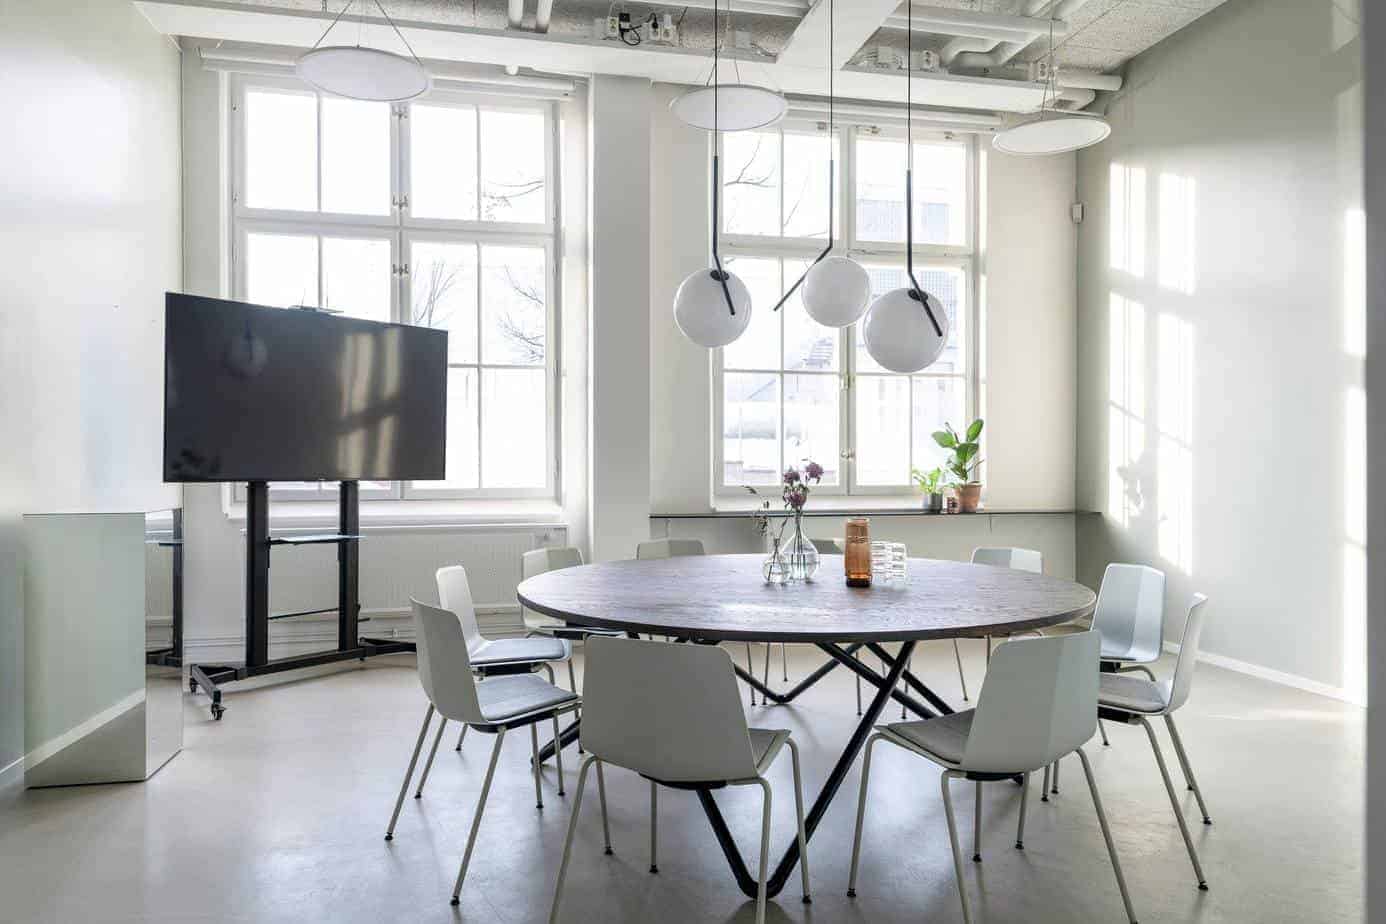 Warm meeting space with lovely lighting